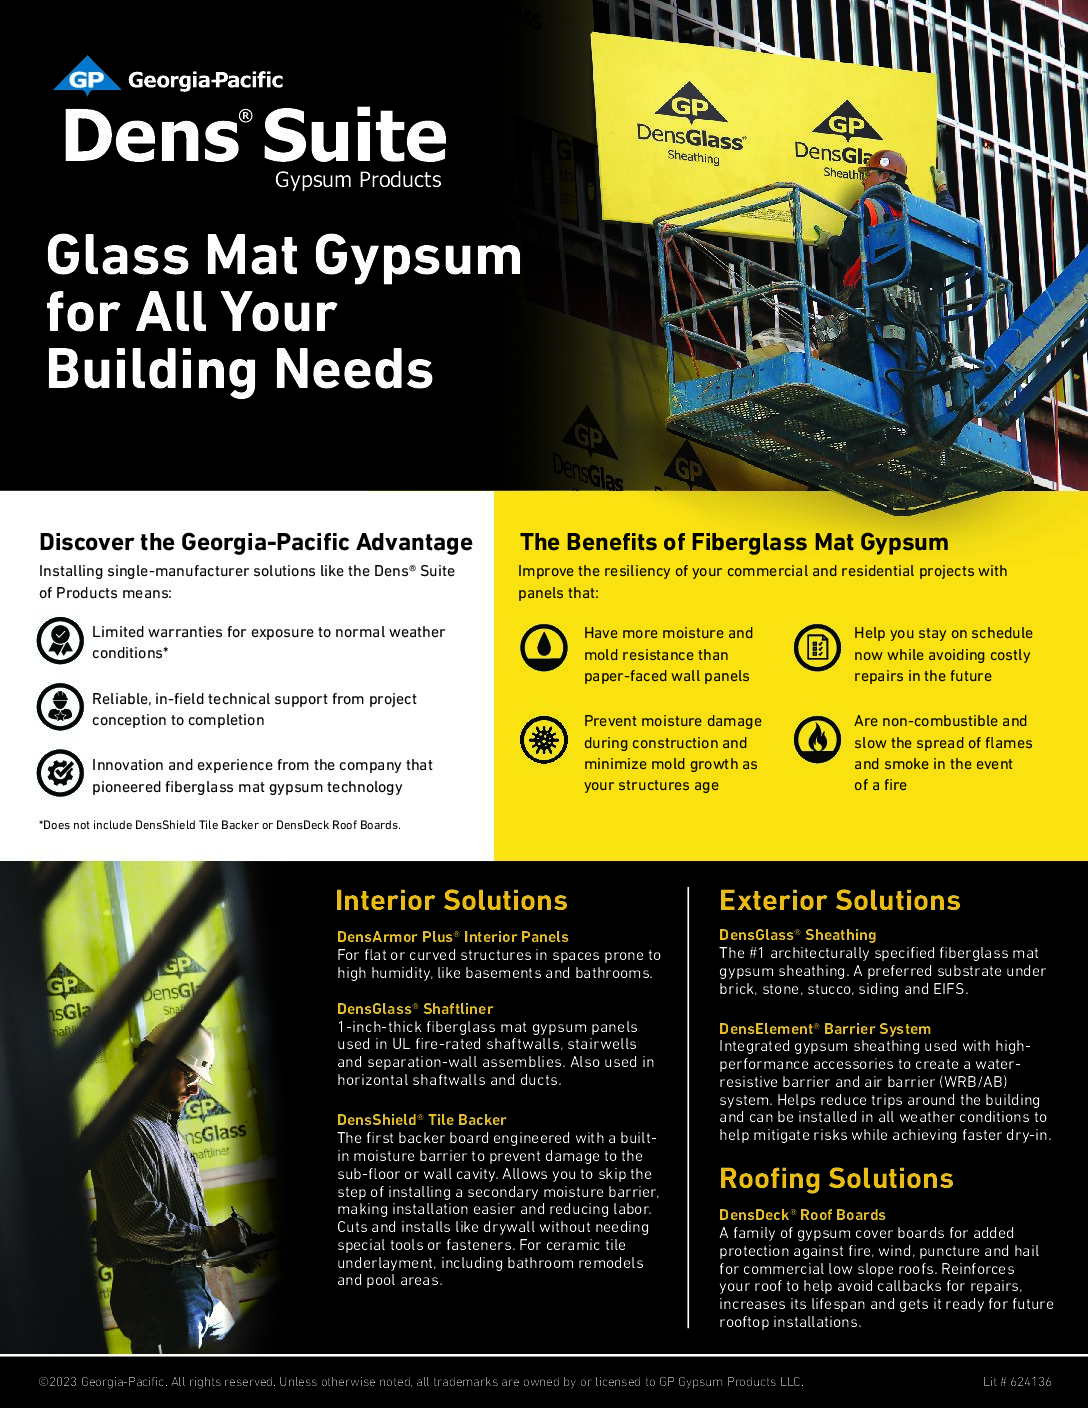 Dens Suite of Gypsum Products Flyer - Document Screen Grab